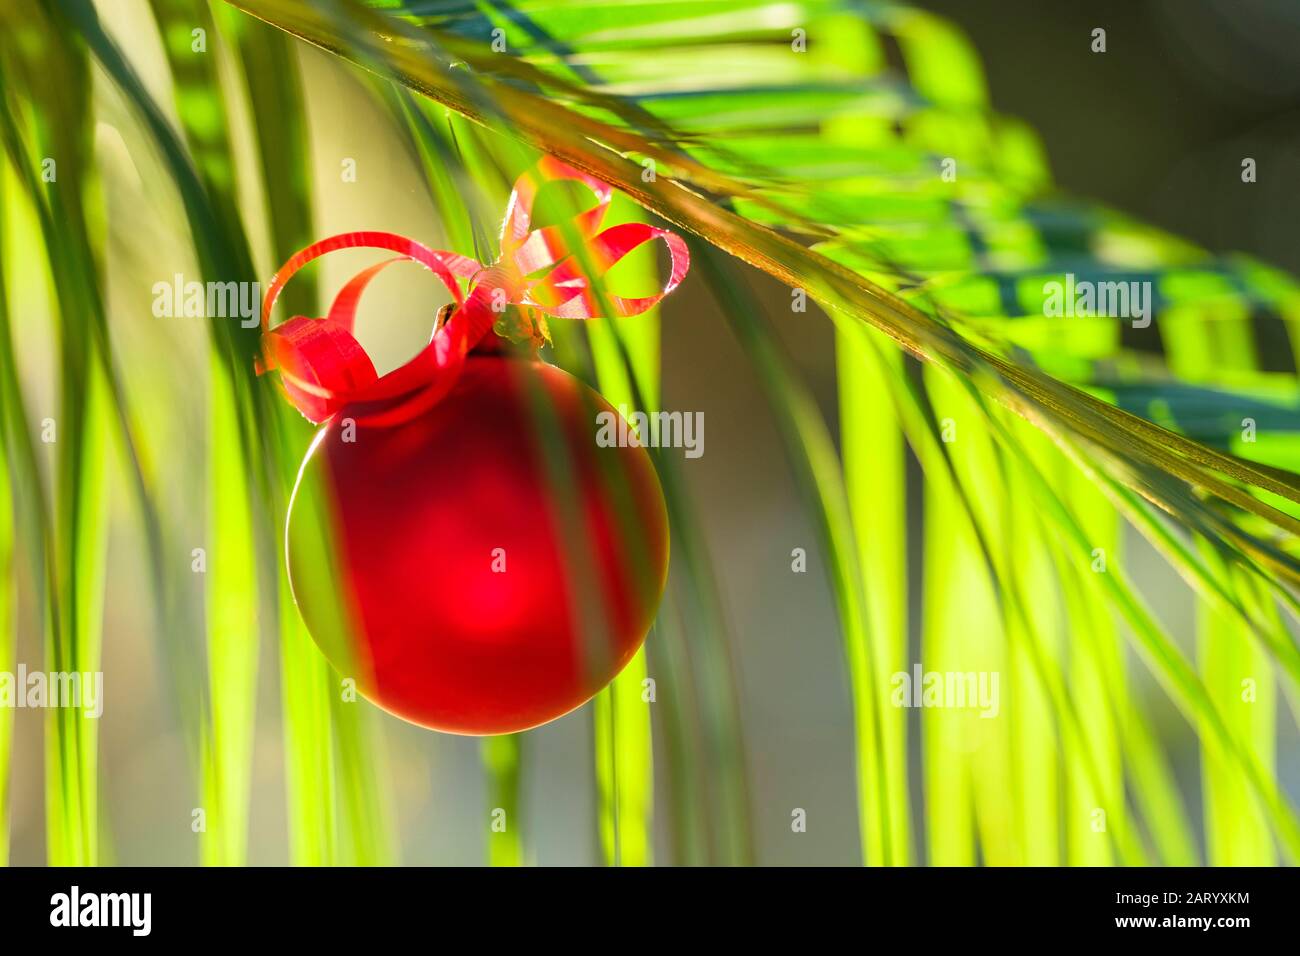 Red bauble hanging from plant Stock Photo